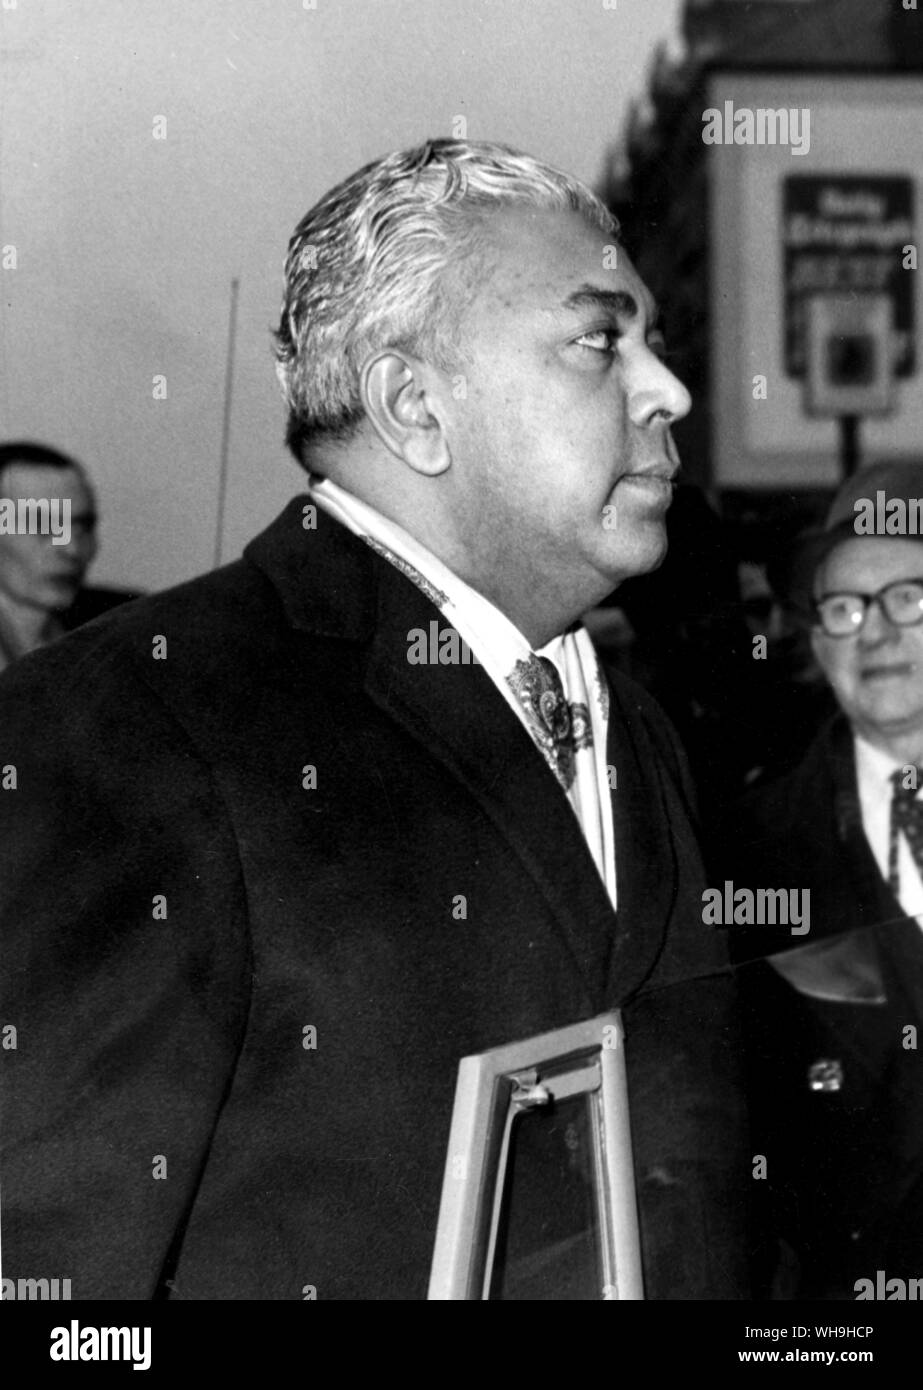 15th January 1967: Dr Emil Savundra, who faces fraud charges involvong more than £500,000 in connection with the Fire Auto and Marine Insurance Company. Stock Photo